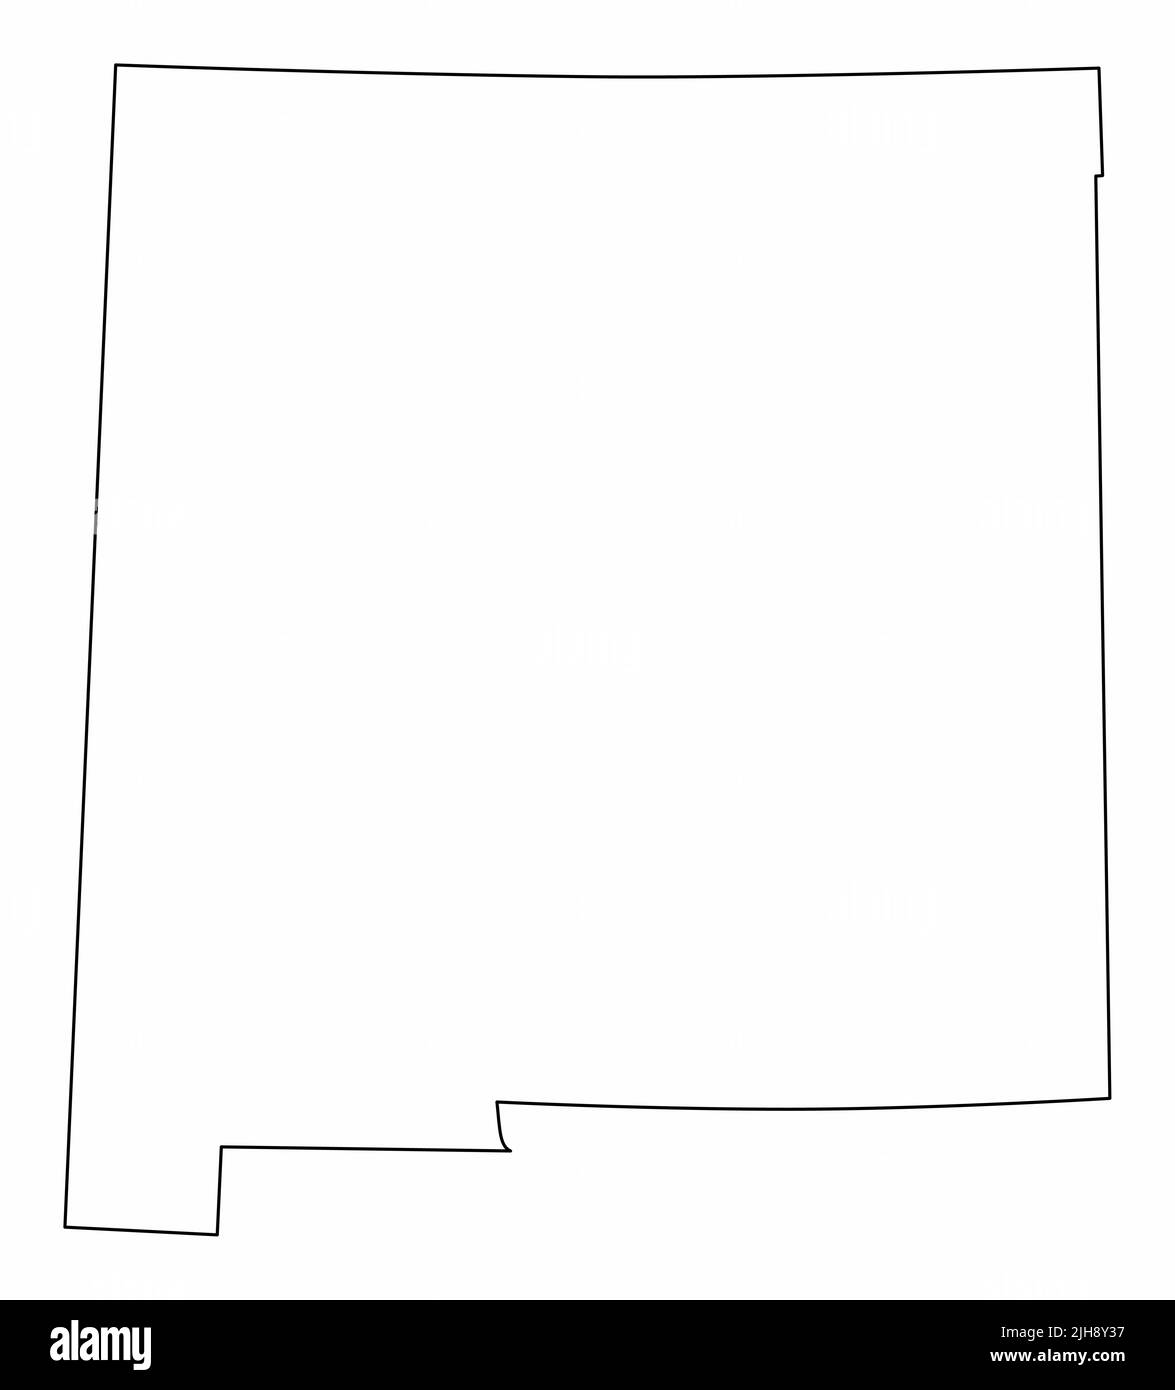 New Mexico State isolated map. Black outlines on white background Stock